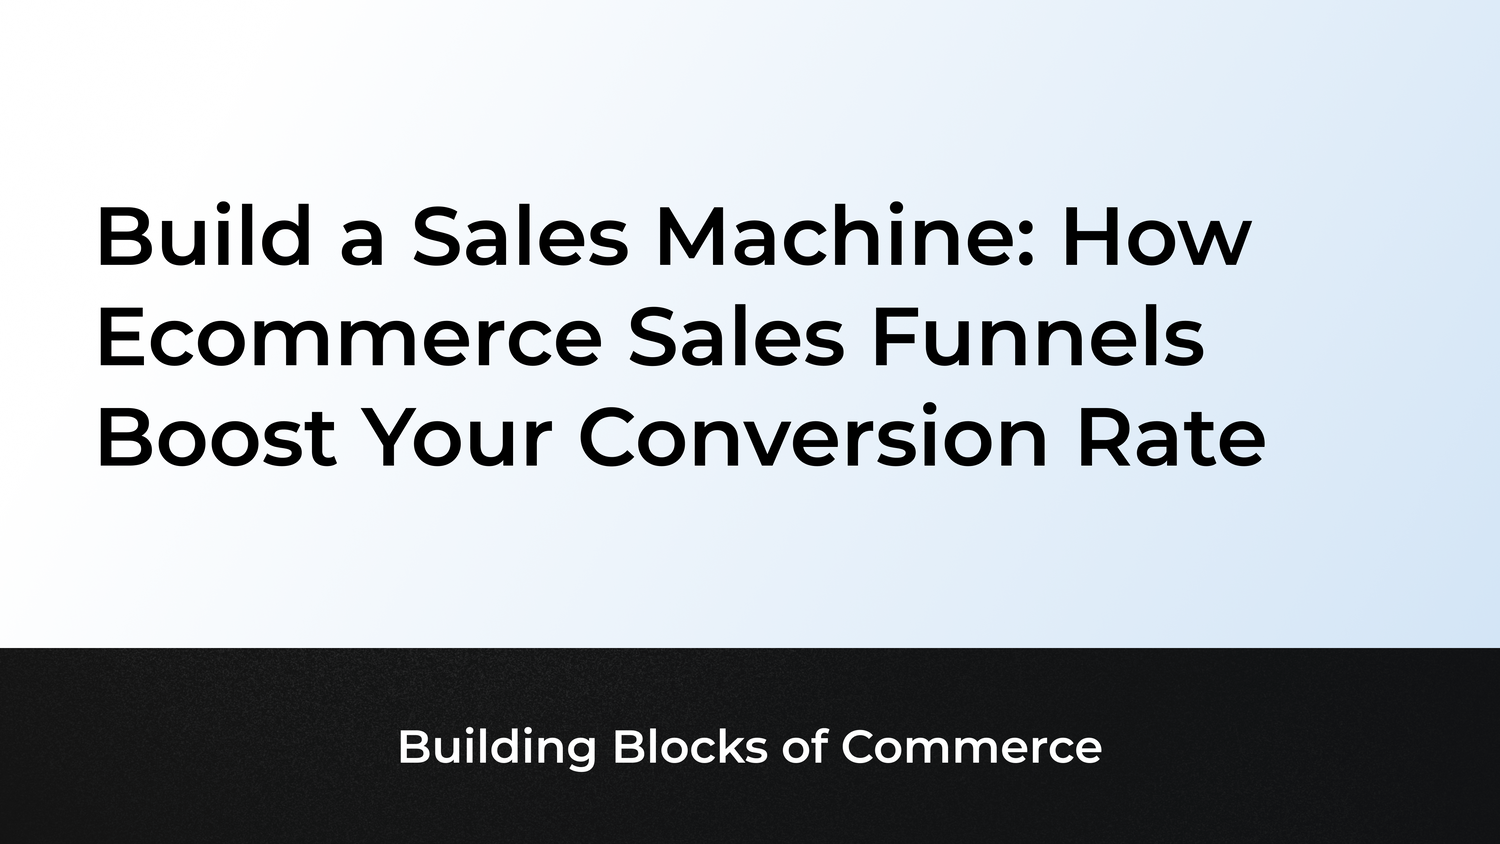 Build a Sales Machine: How Ecommerce Sales Funnels Boost Your Conversion Rate